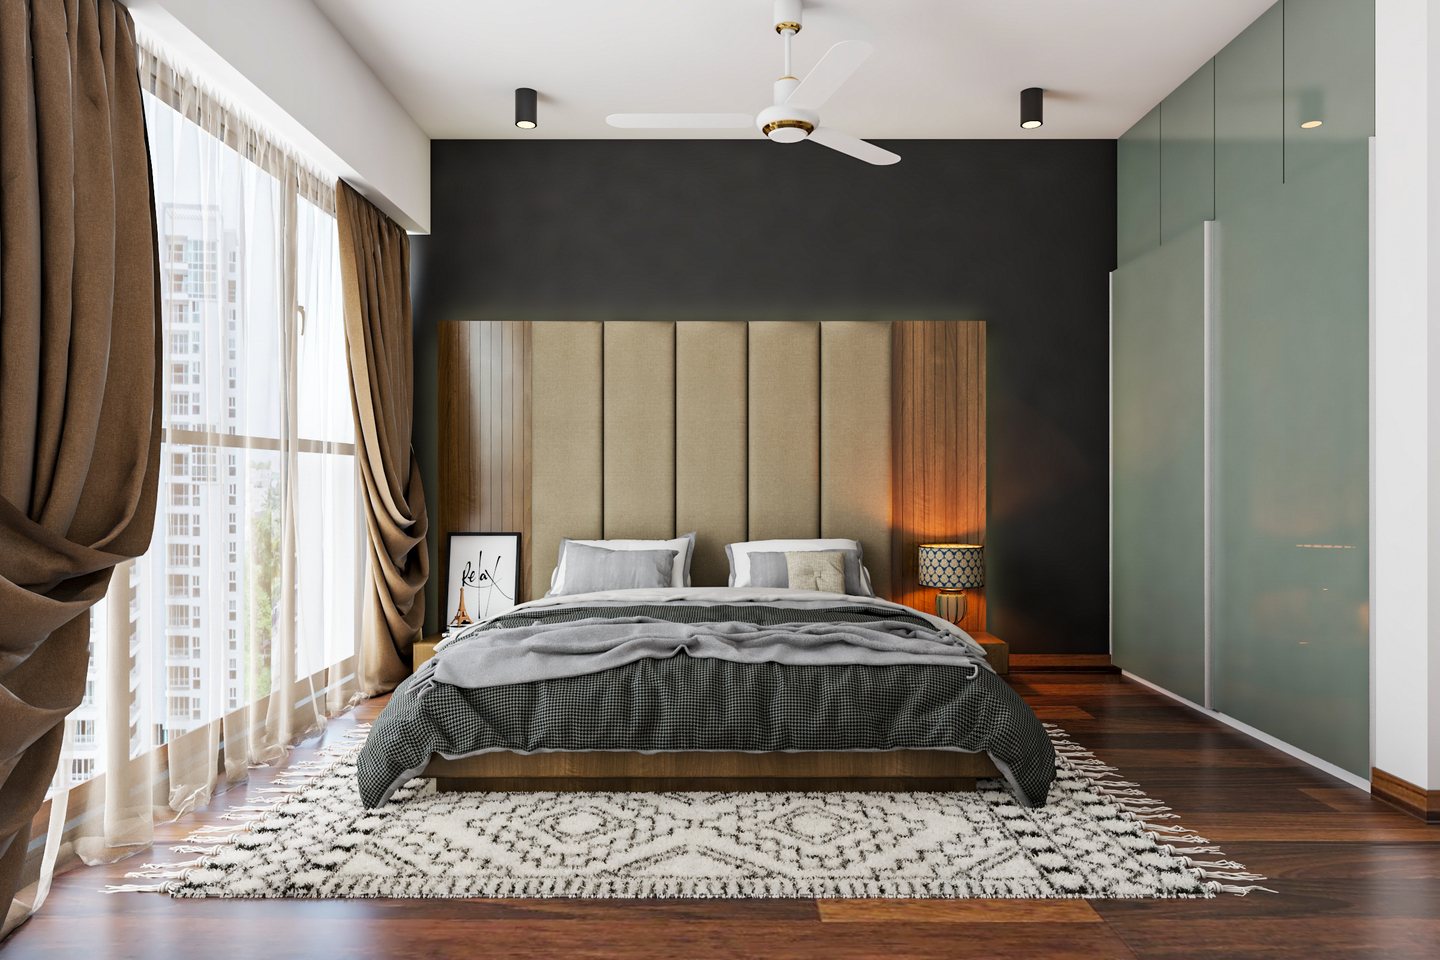 Modern Bedroom with Separate Study Room - Livspace